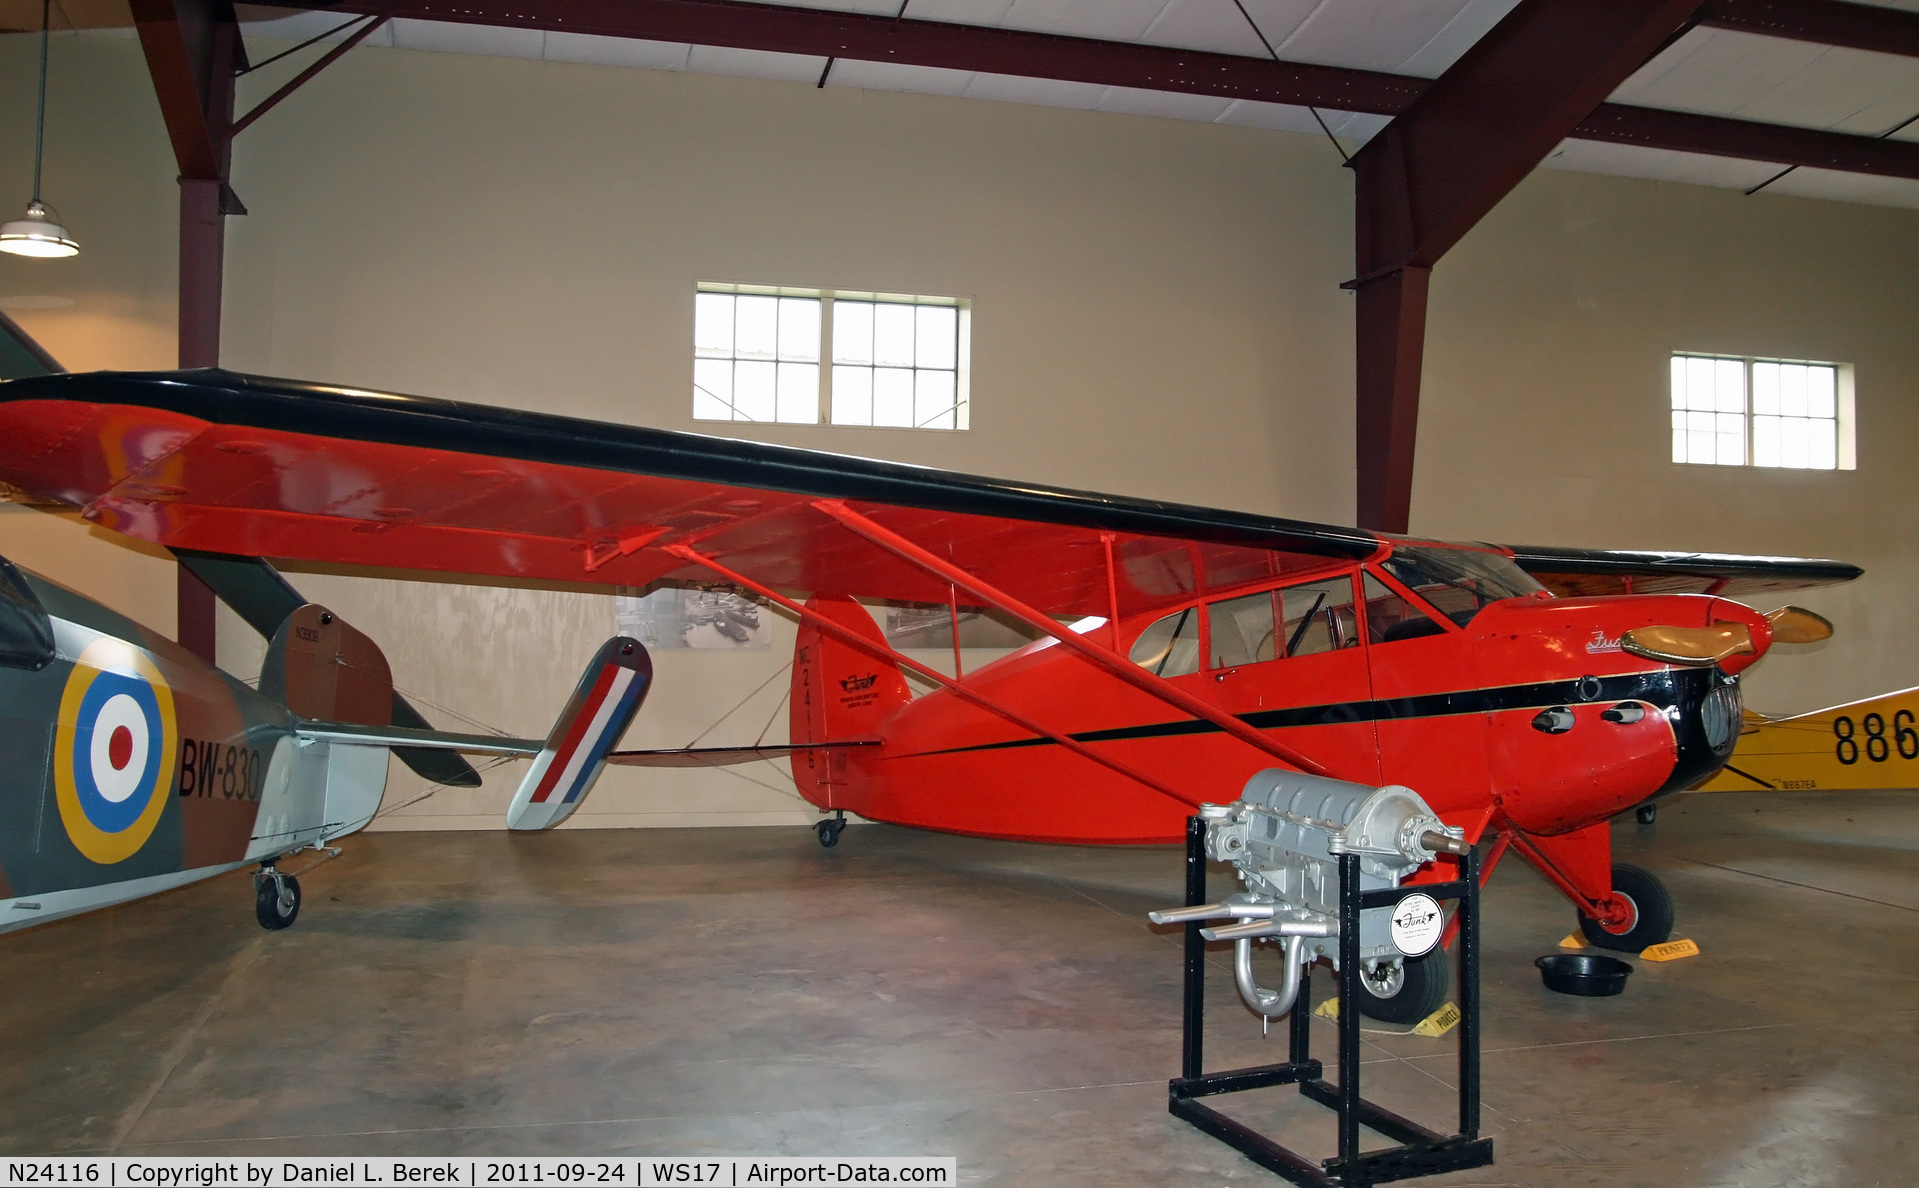 N24116, 1940 Funk B C/N 45, The Funk B was the Akron Aircraft Company's entry to the U.S. Government's Depression-era program to produce an aircraft that would sell for $700.  The aircraft, not built until 1940, ended up costing $1,950, still a bargain and a popular machine owing to